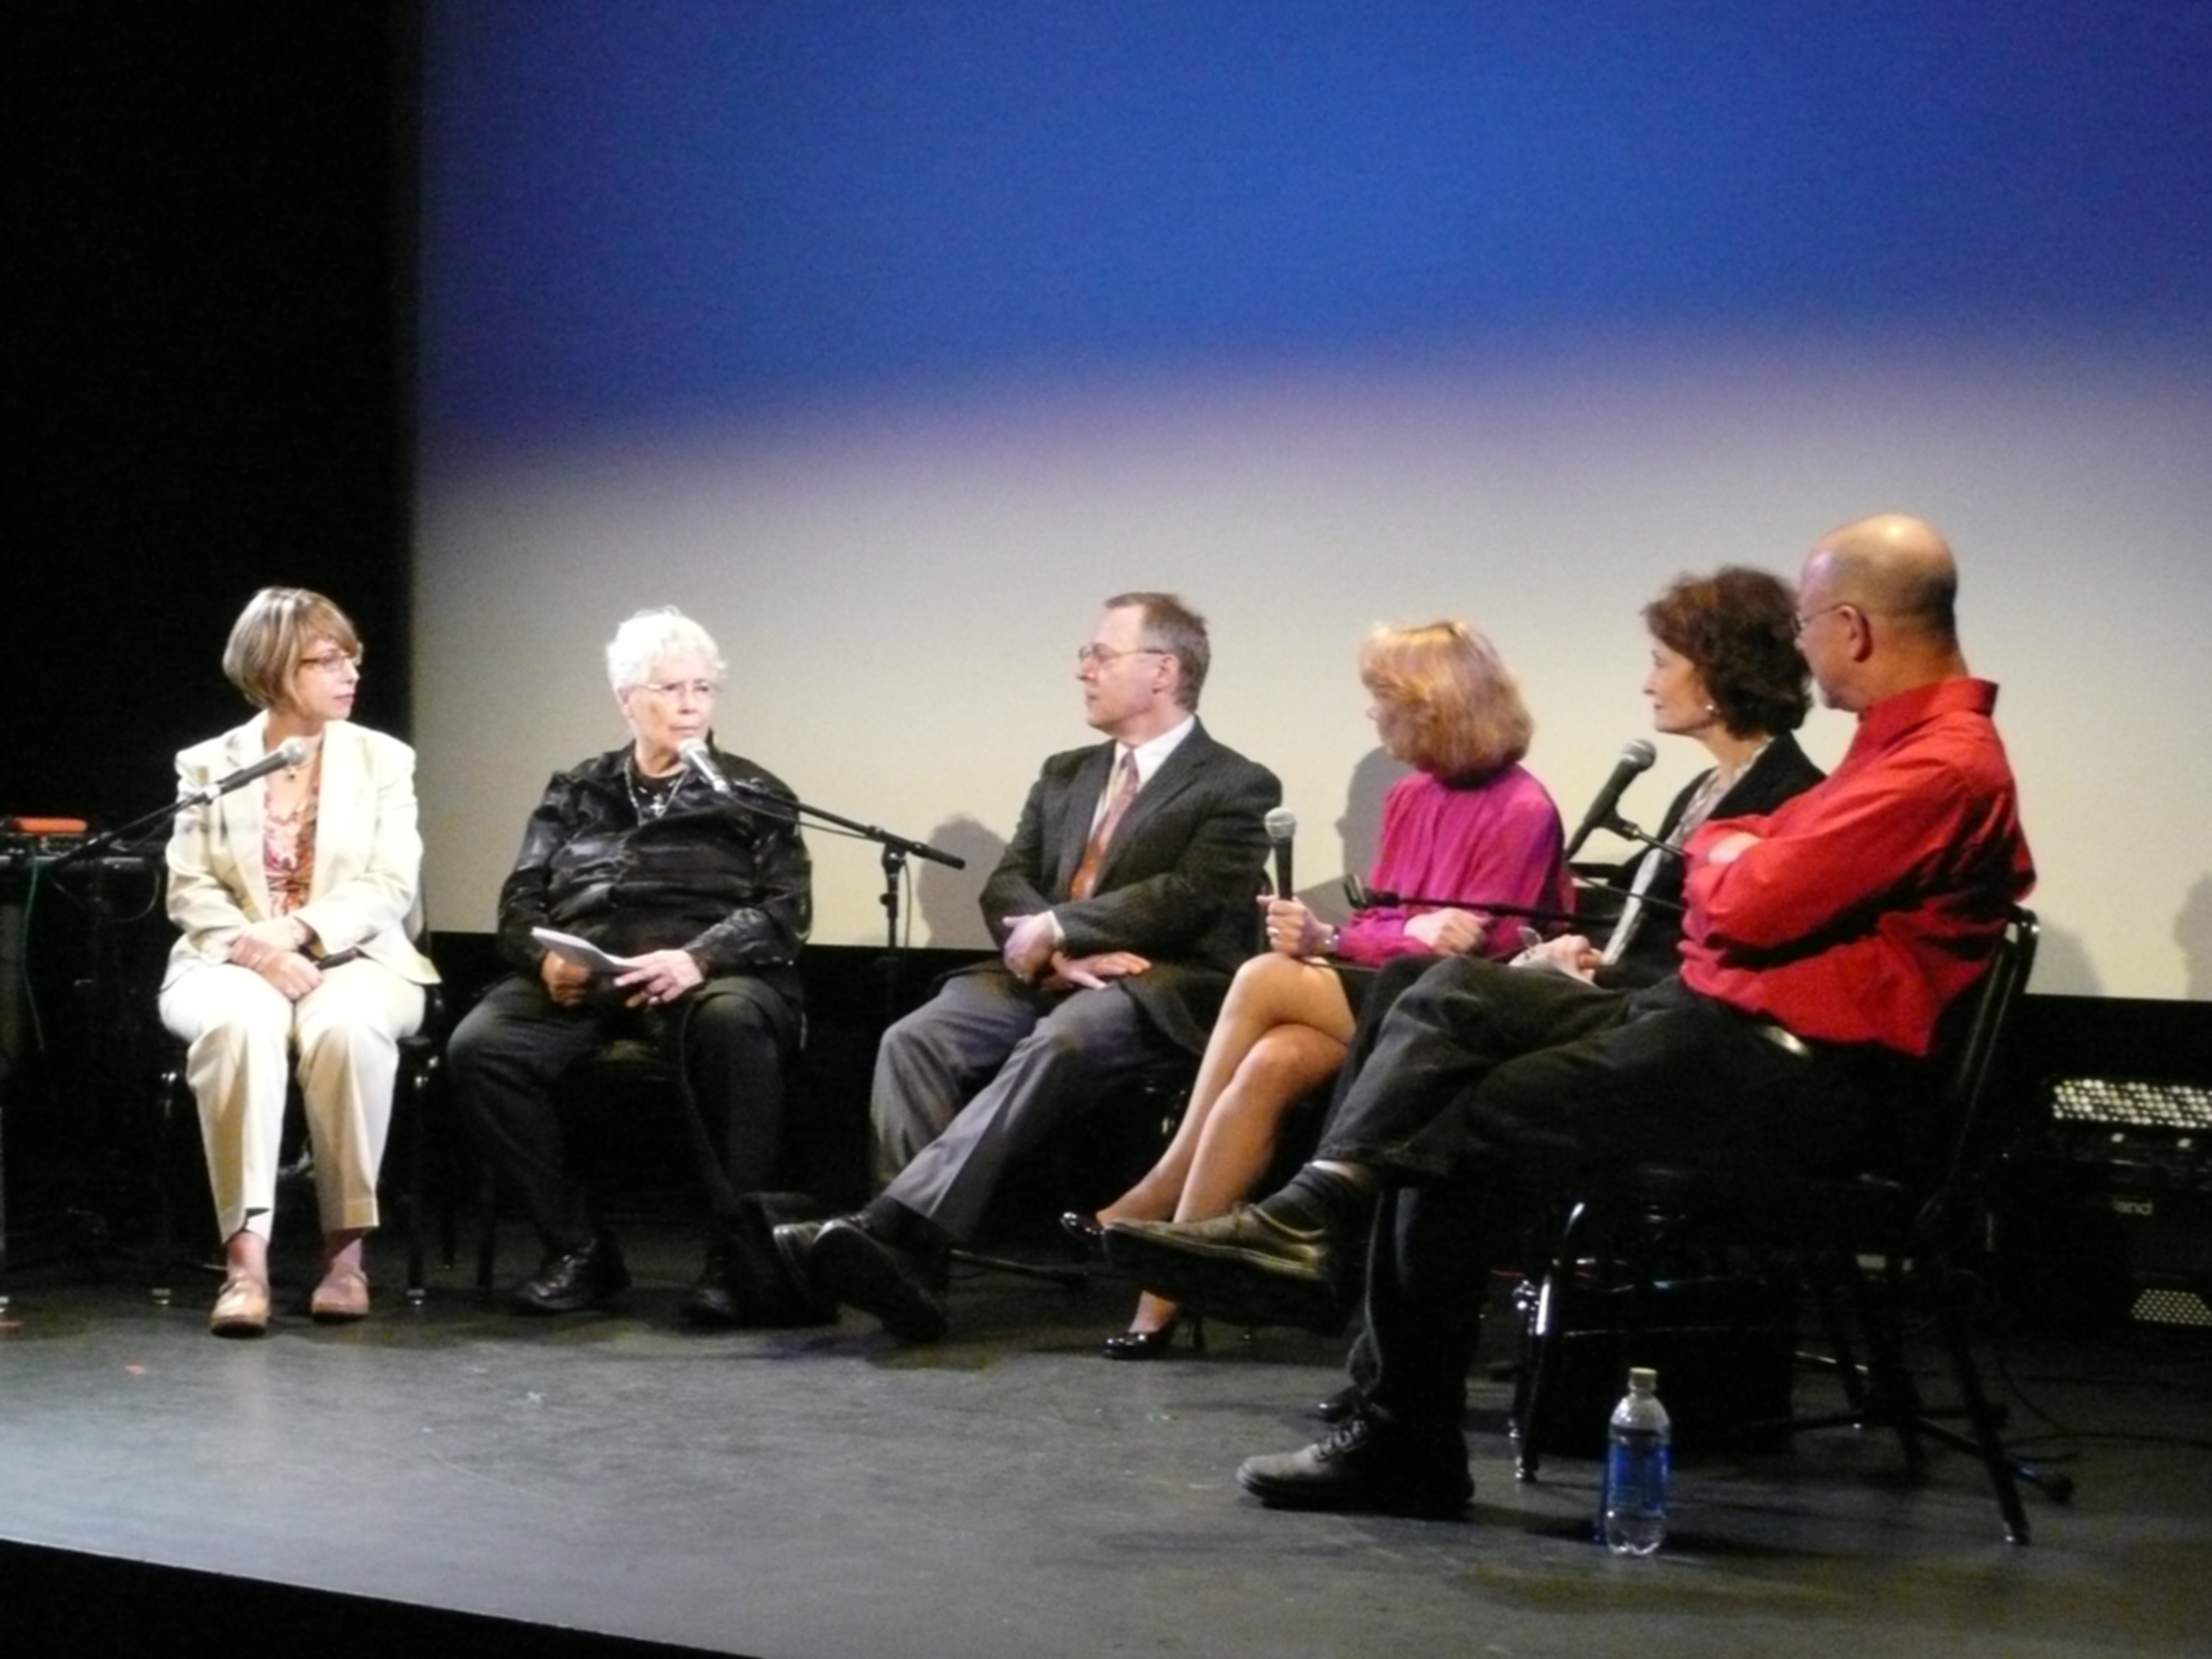 Karen Popkin, Pauline Oliveros, Matthew Gurewitch, Victoria Bond, Dr. Barrie Cassileth, and Neil Rolnick at an onstage panel discussion in 2010.